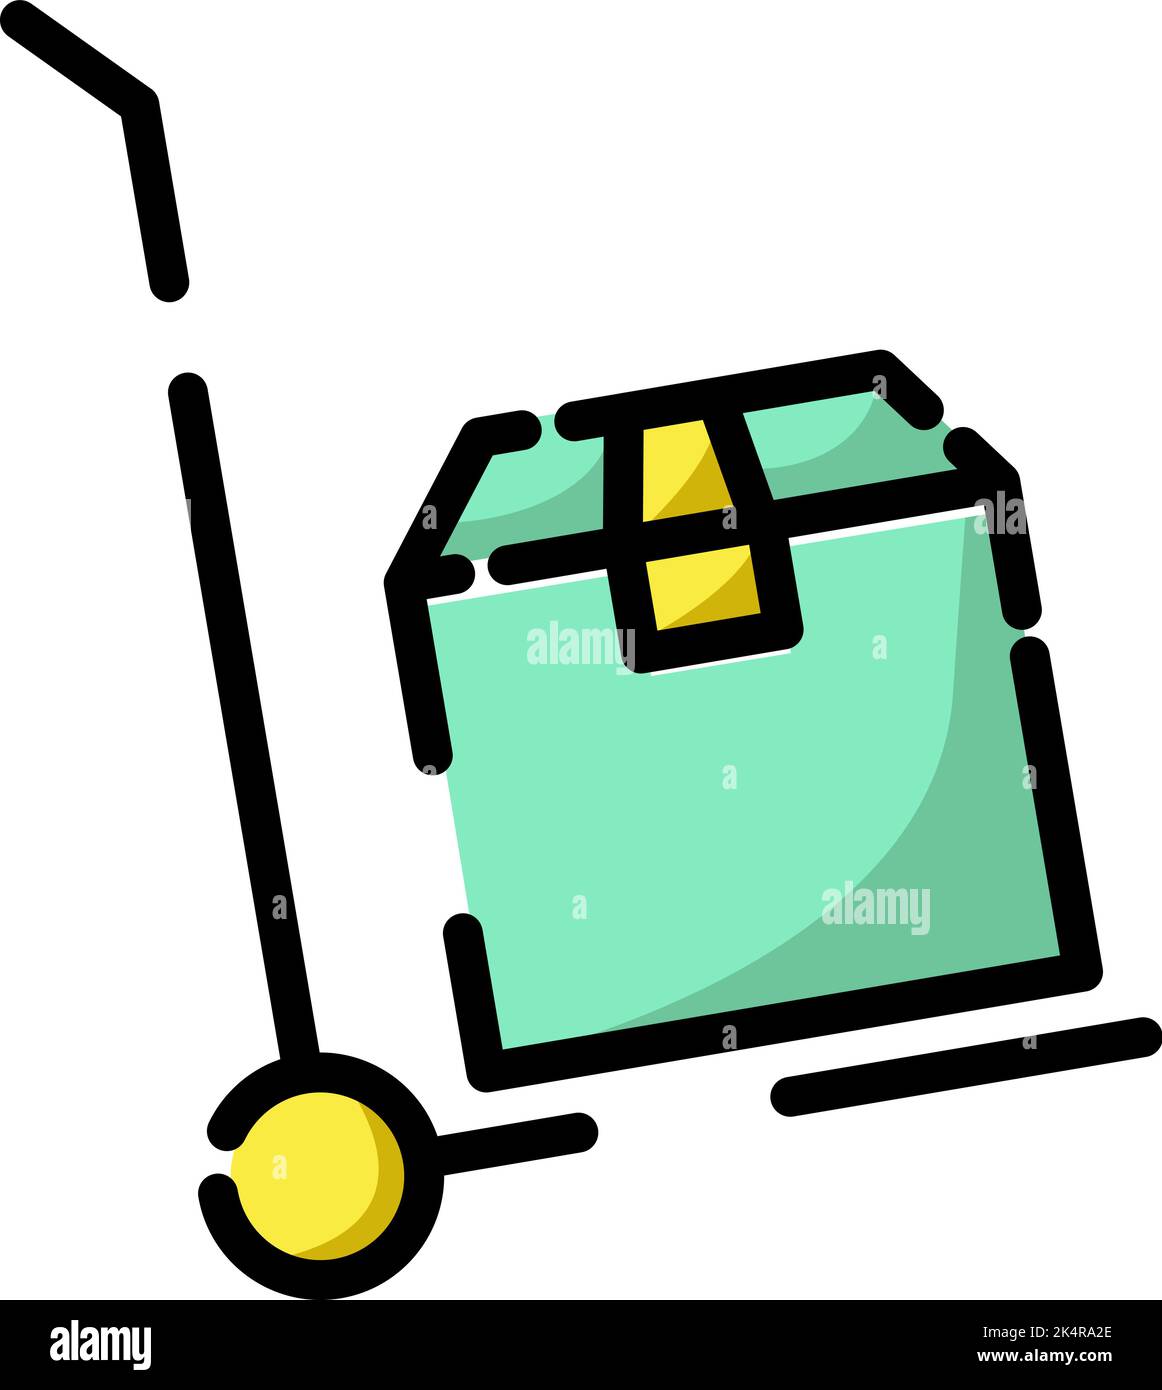 Handtruck for shipping, illustration, vector on a white background. Stock Vector